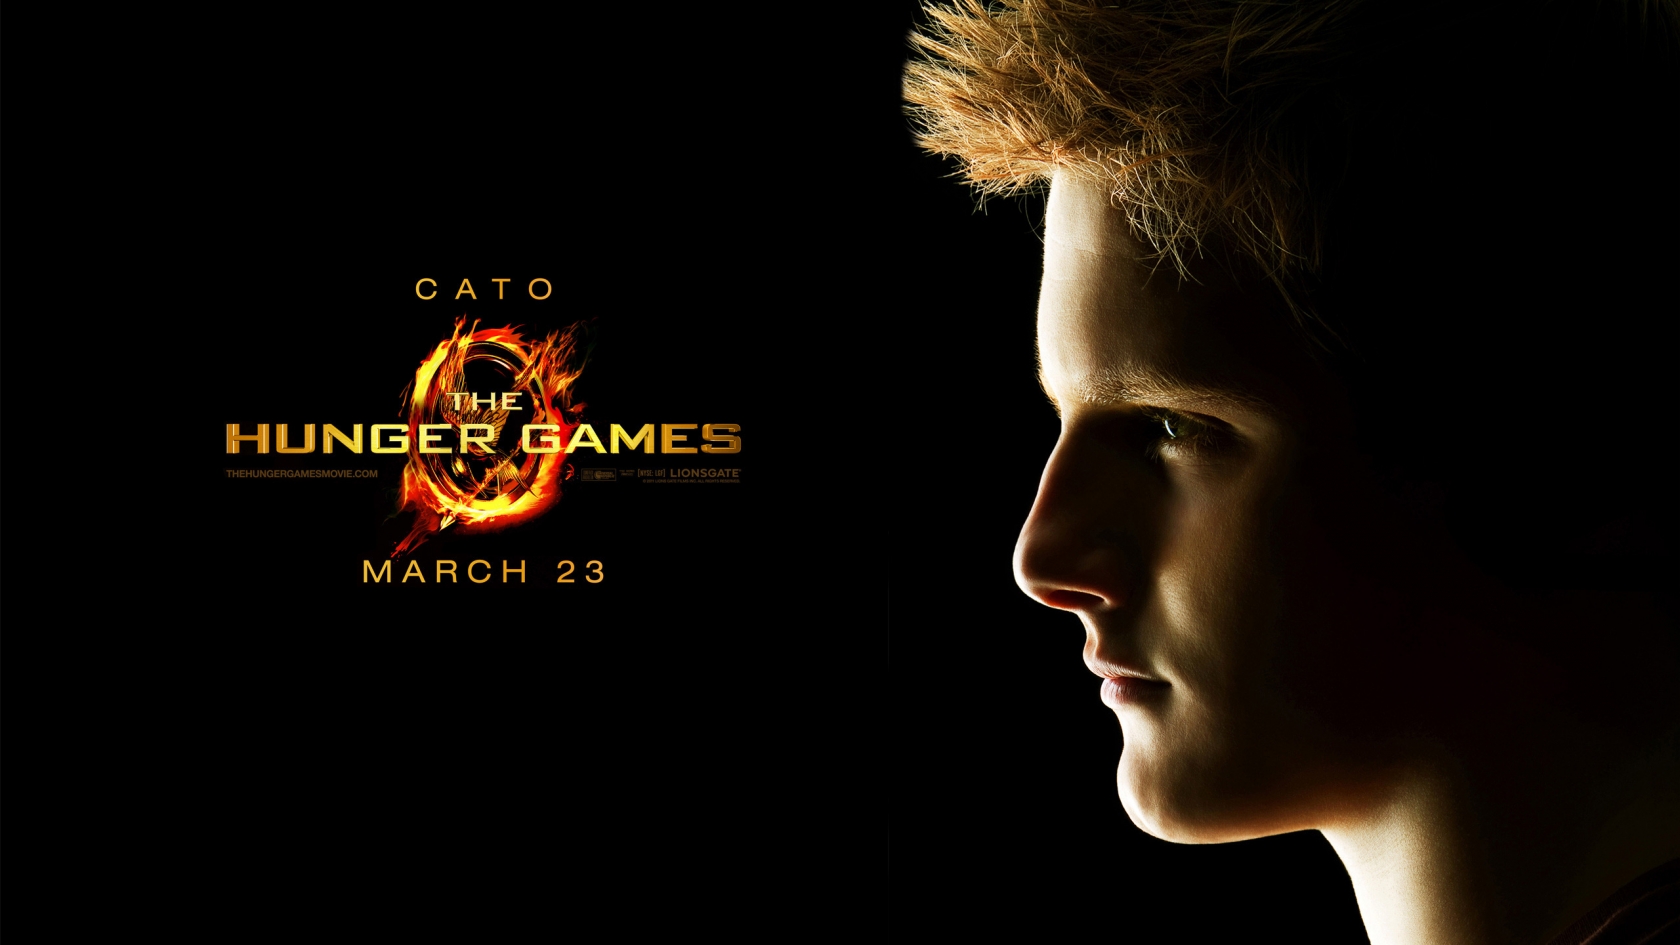 The Hunger Games Cato for 1680 x 945 HDTV resolution